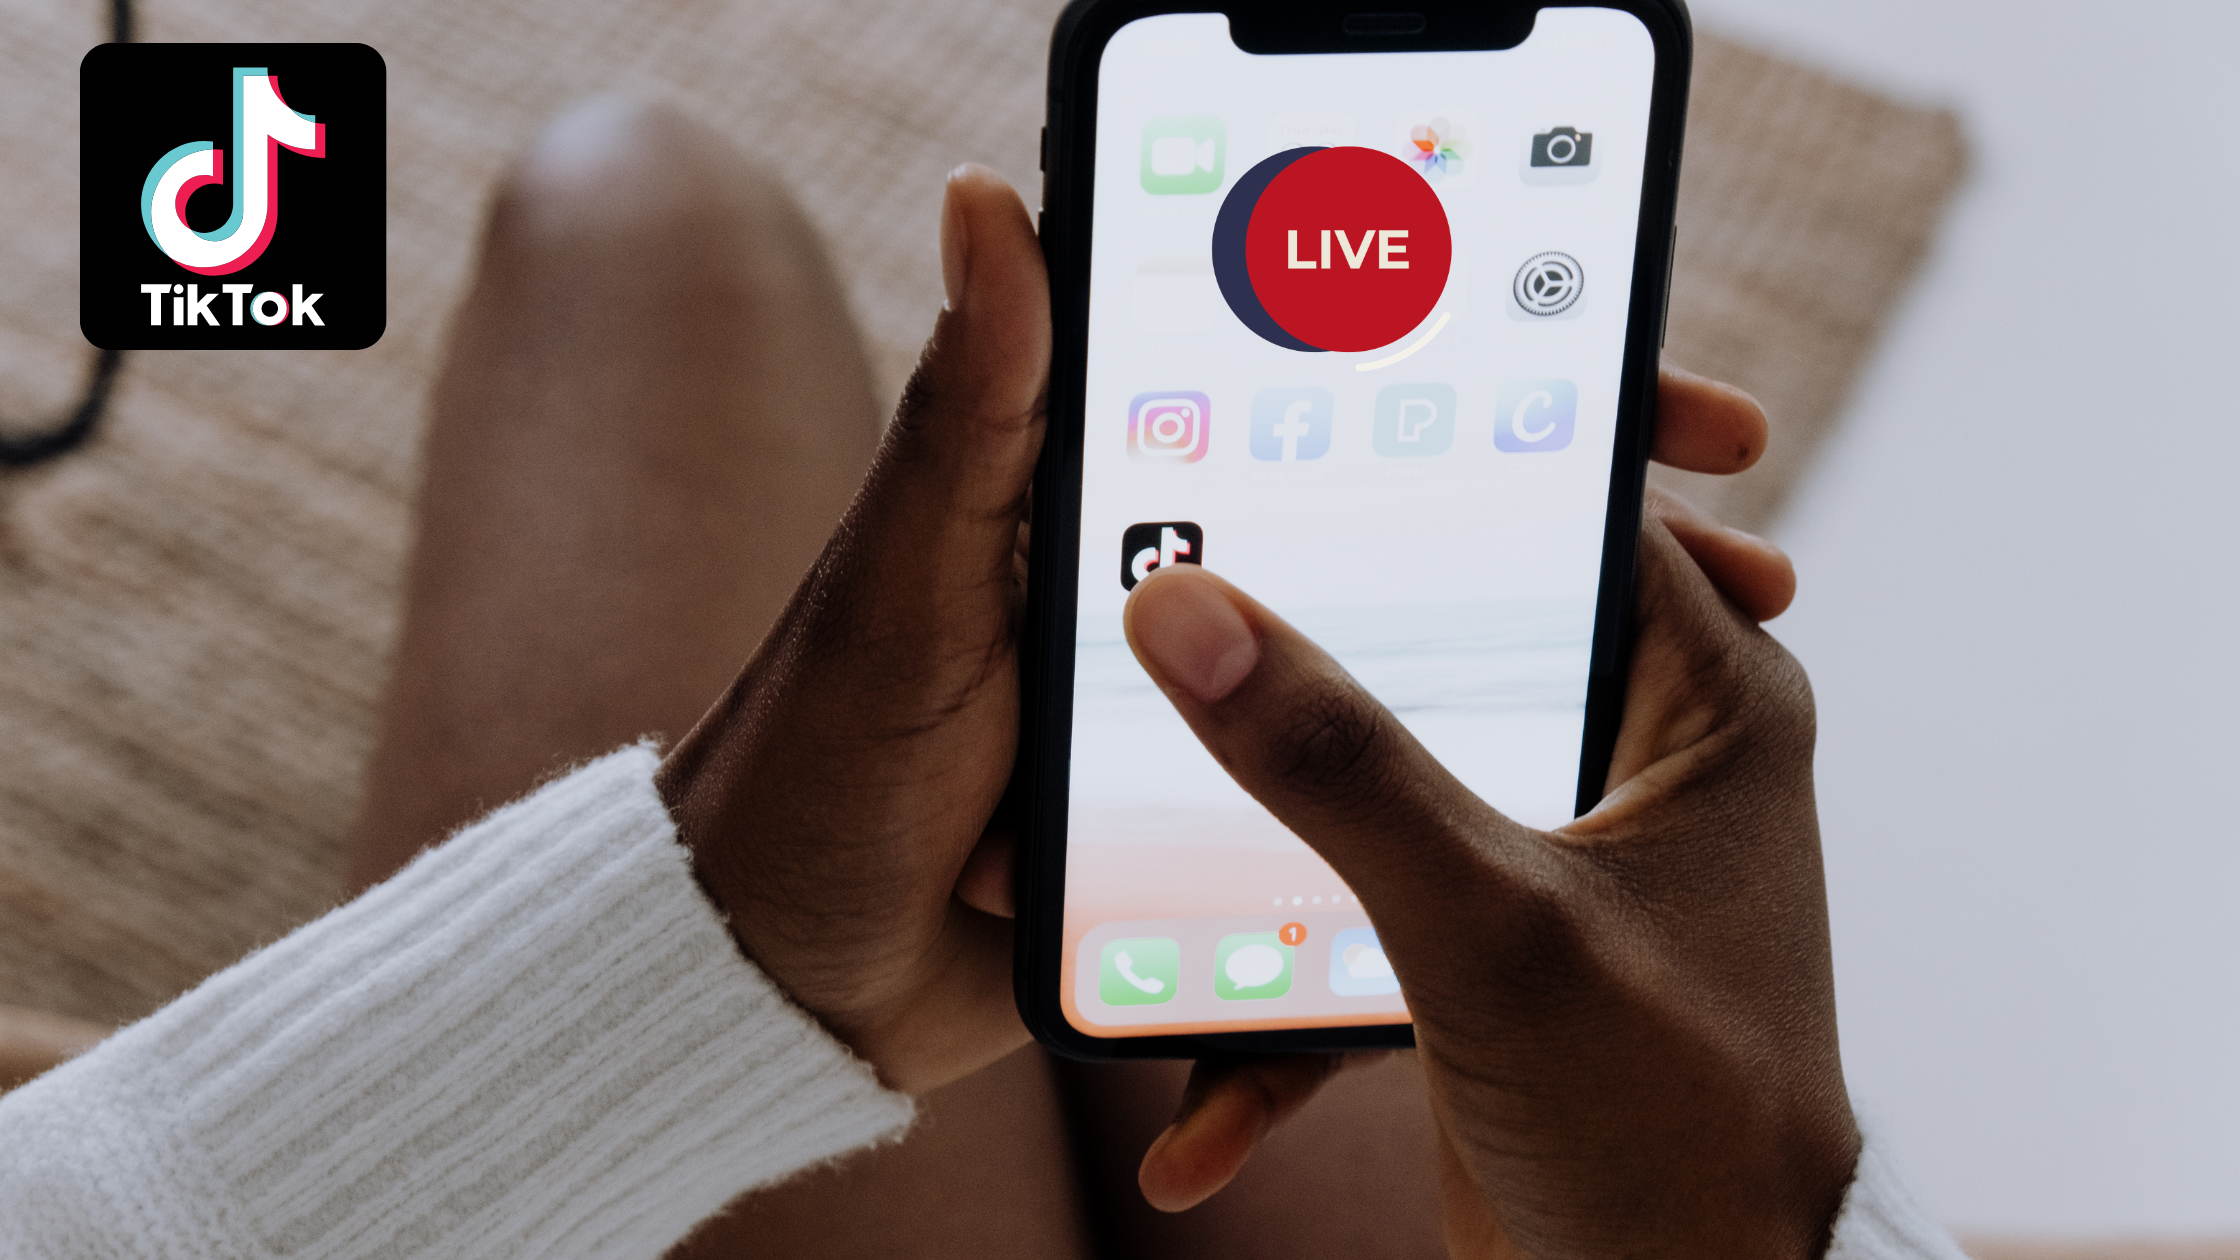 Can you go live on TikTok from a computer?